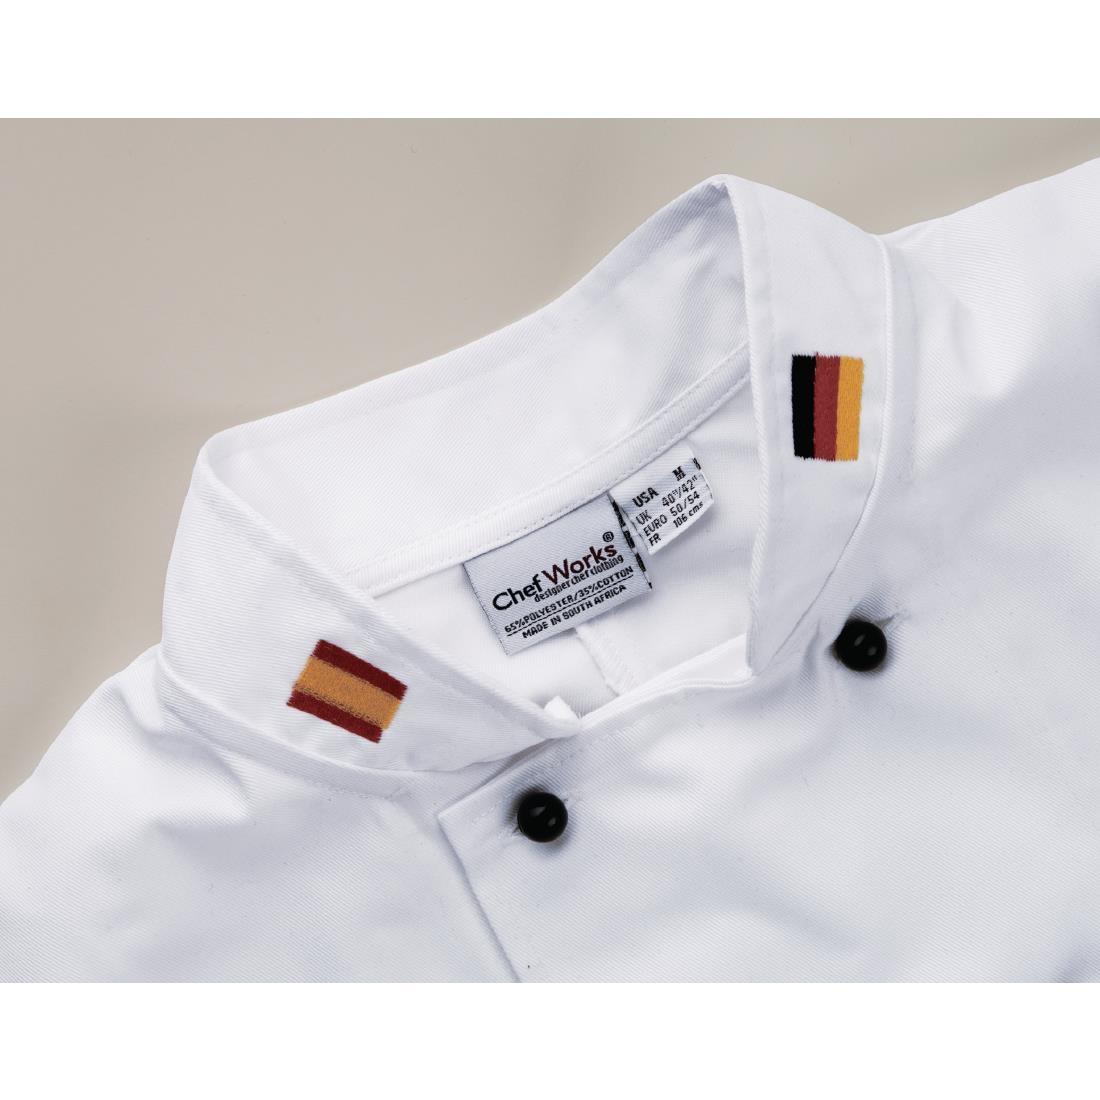 Embroidery Collar Flags - A987-BE  - 1